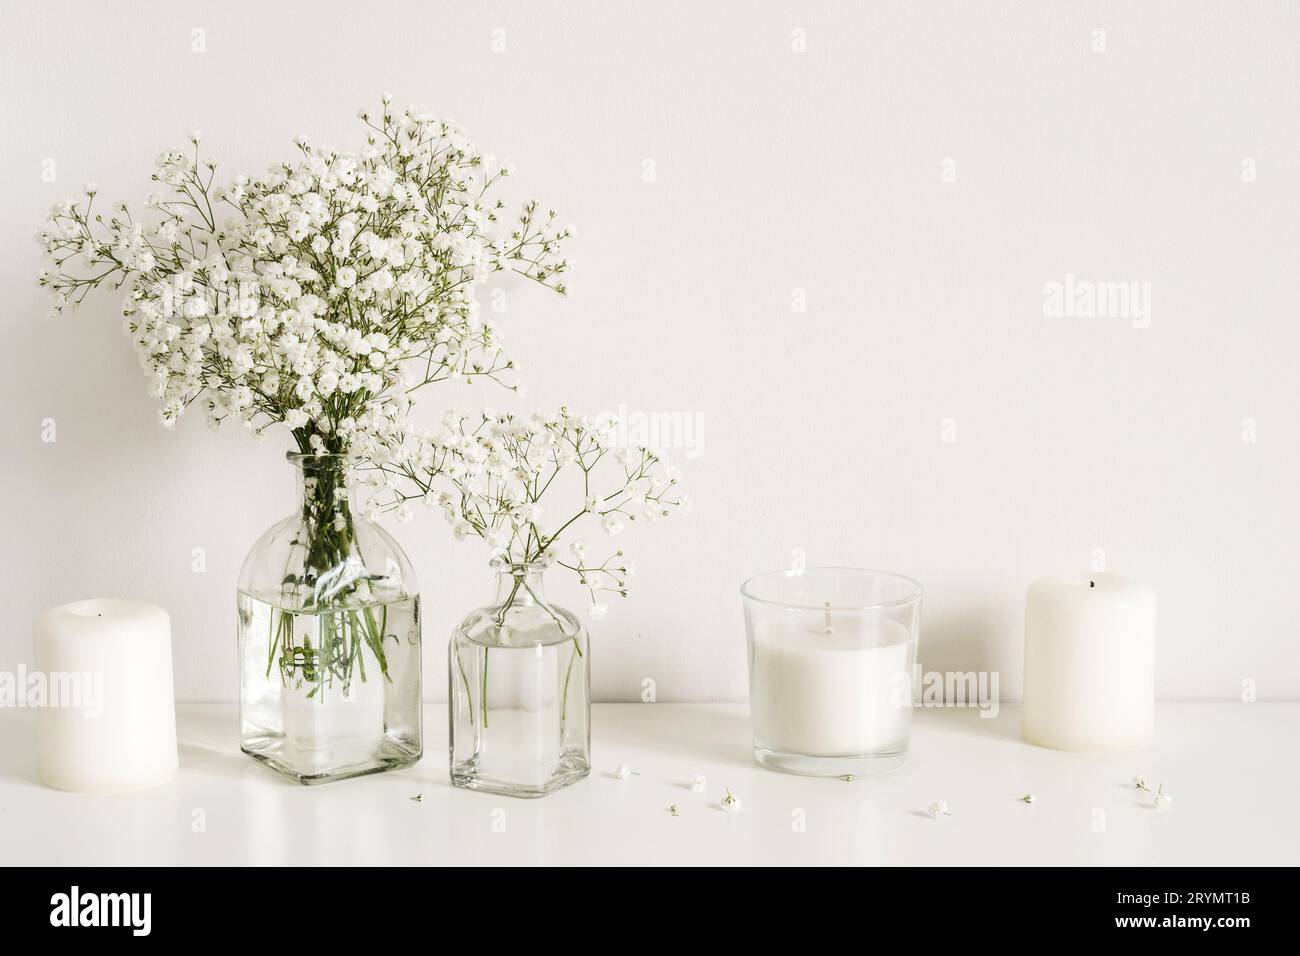 White arrangement of baby's breath flowers and candles. Copy space for lettering Stock Photo